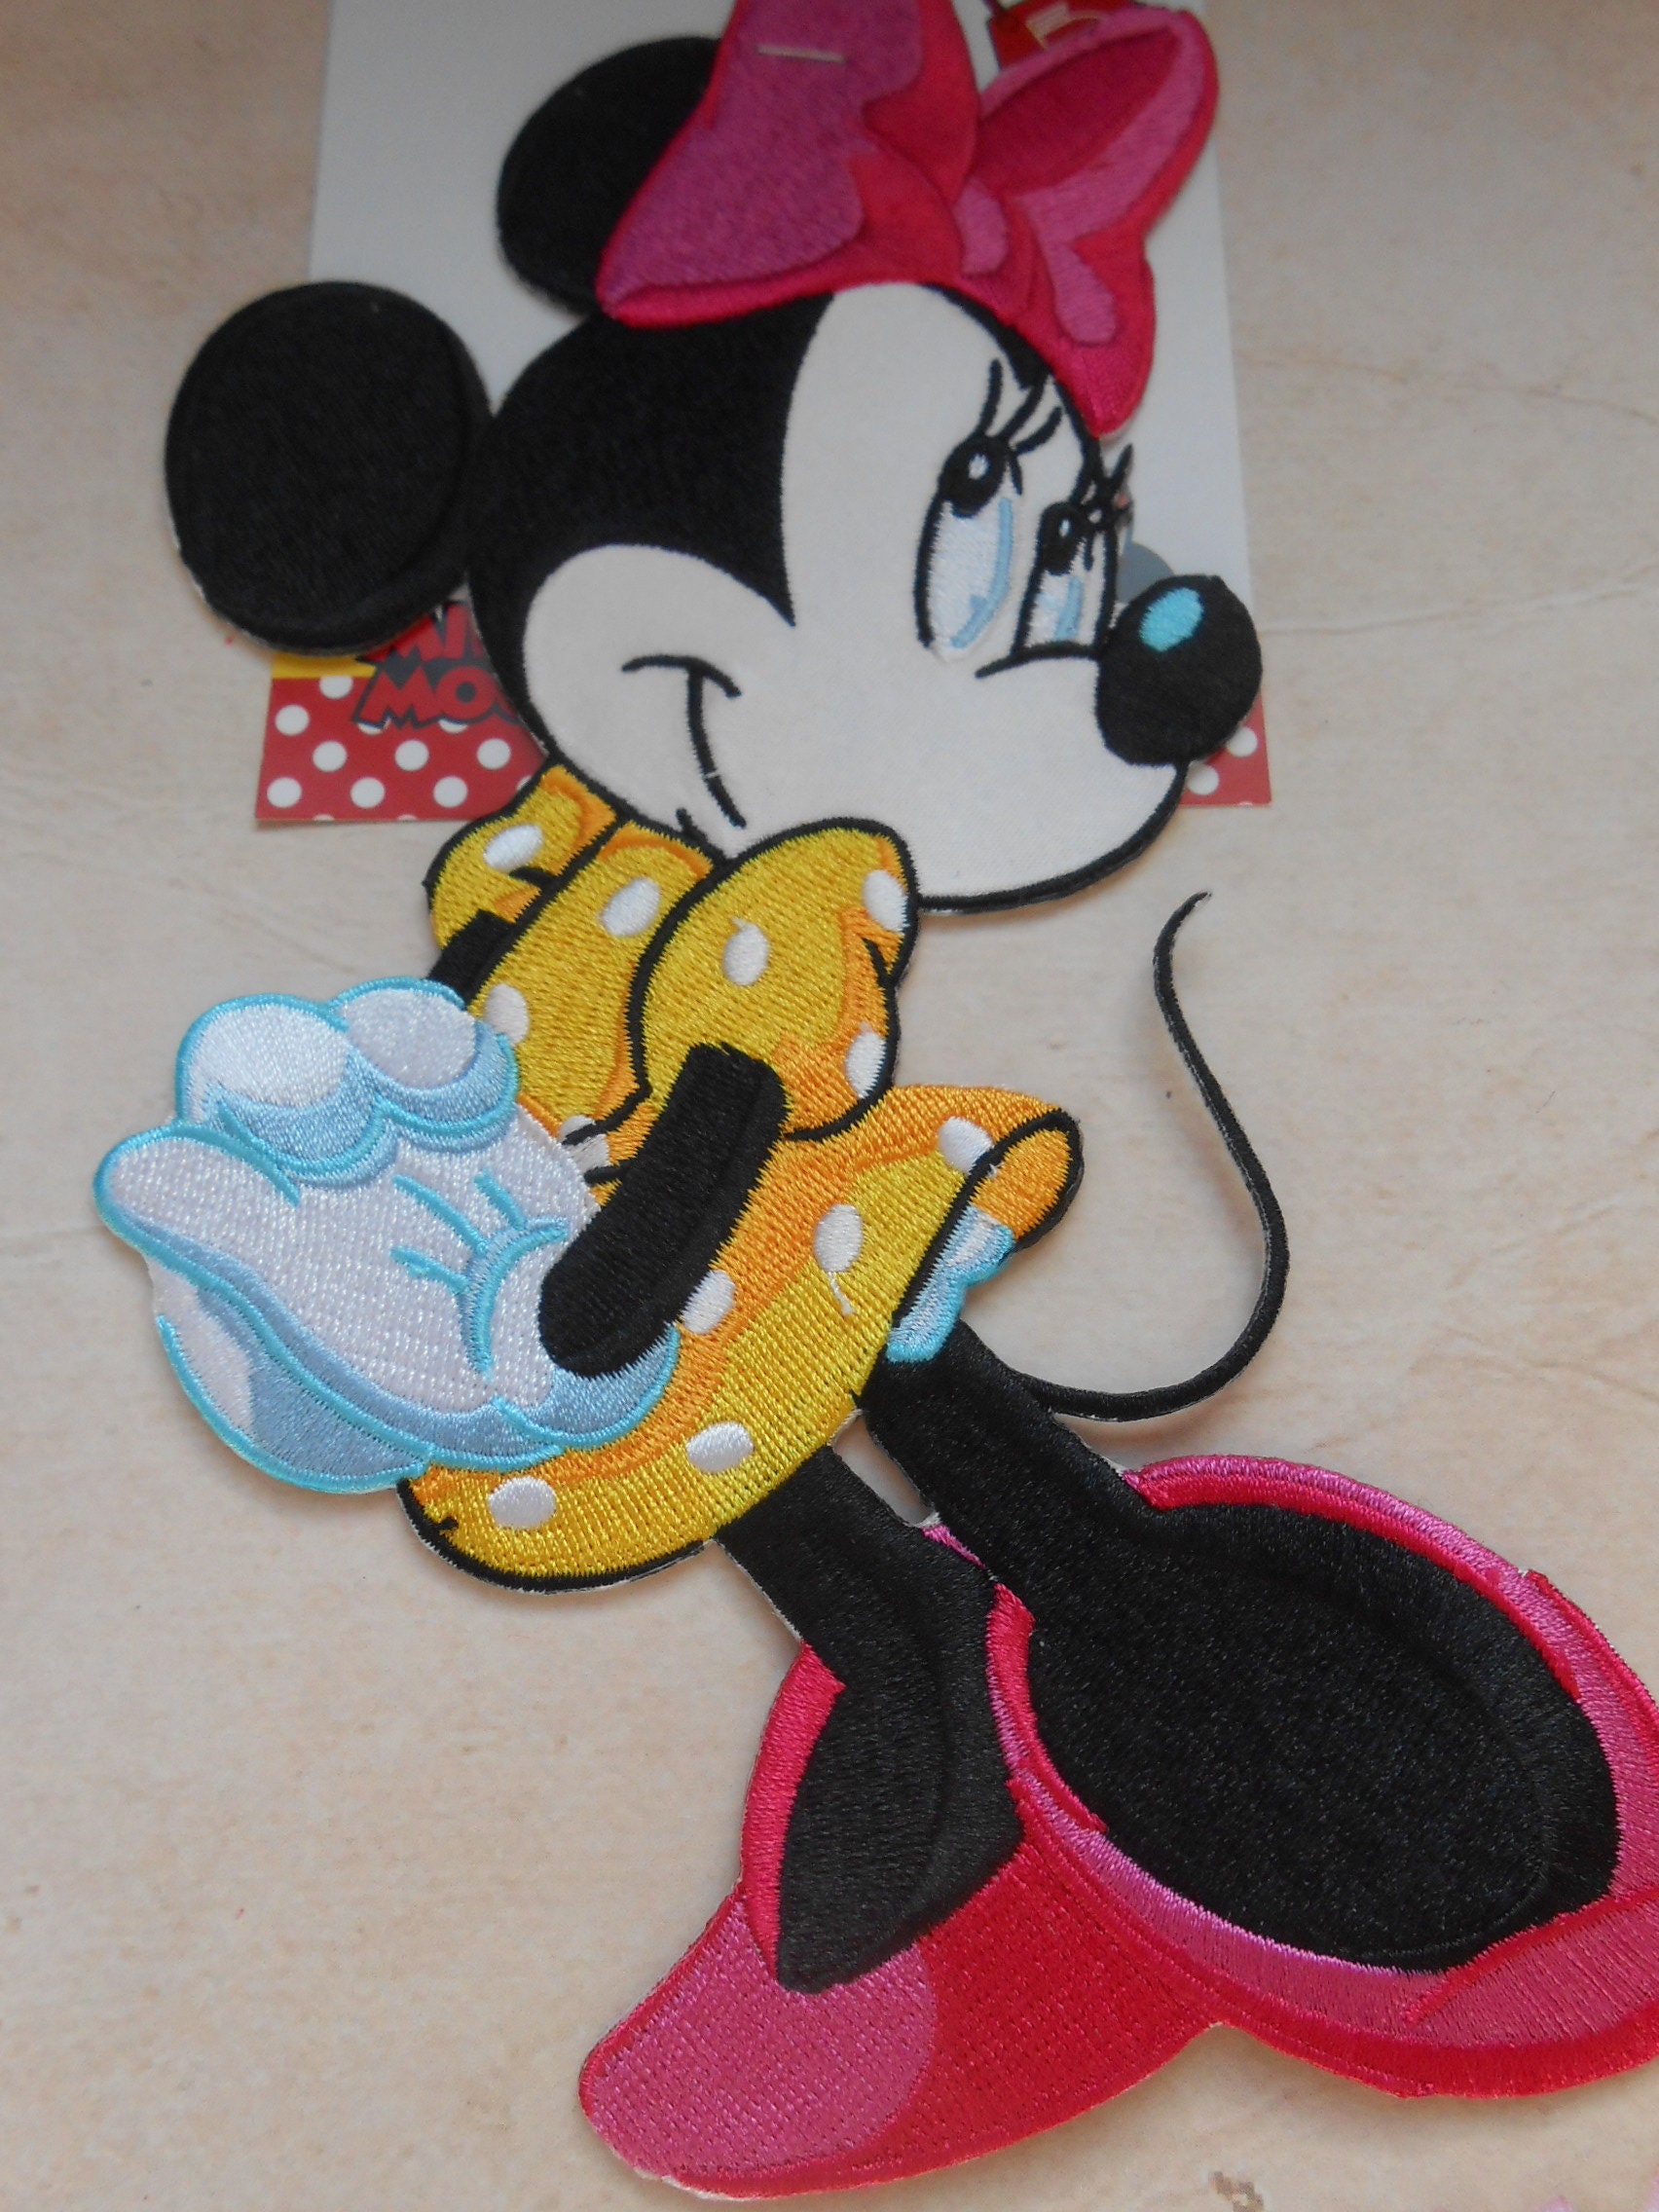 12Pcs Mini Set Mickey Iron On Patches for Clothing Minnie Mouse